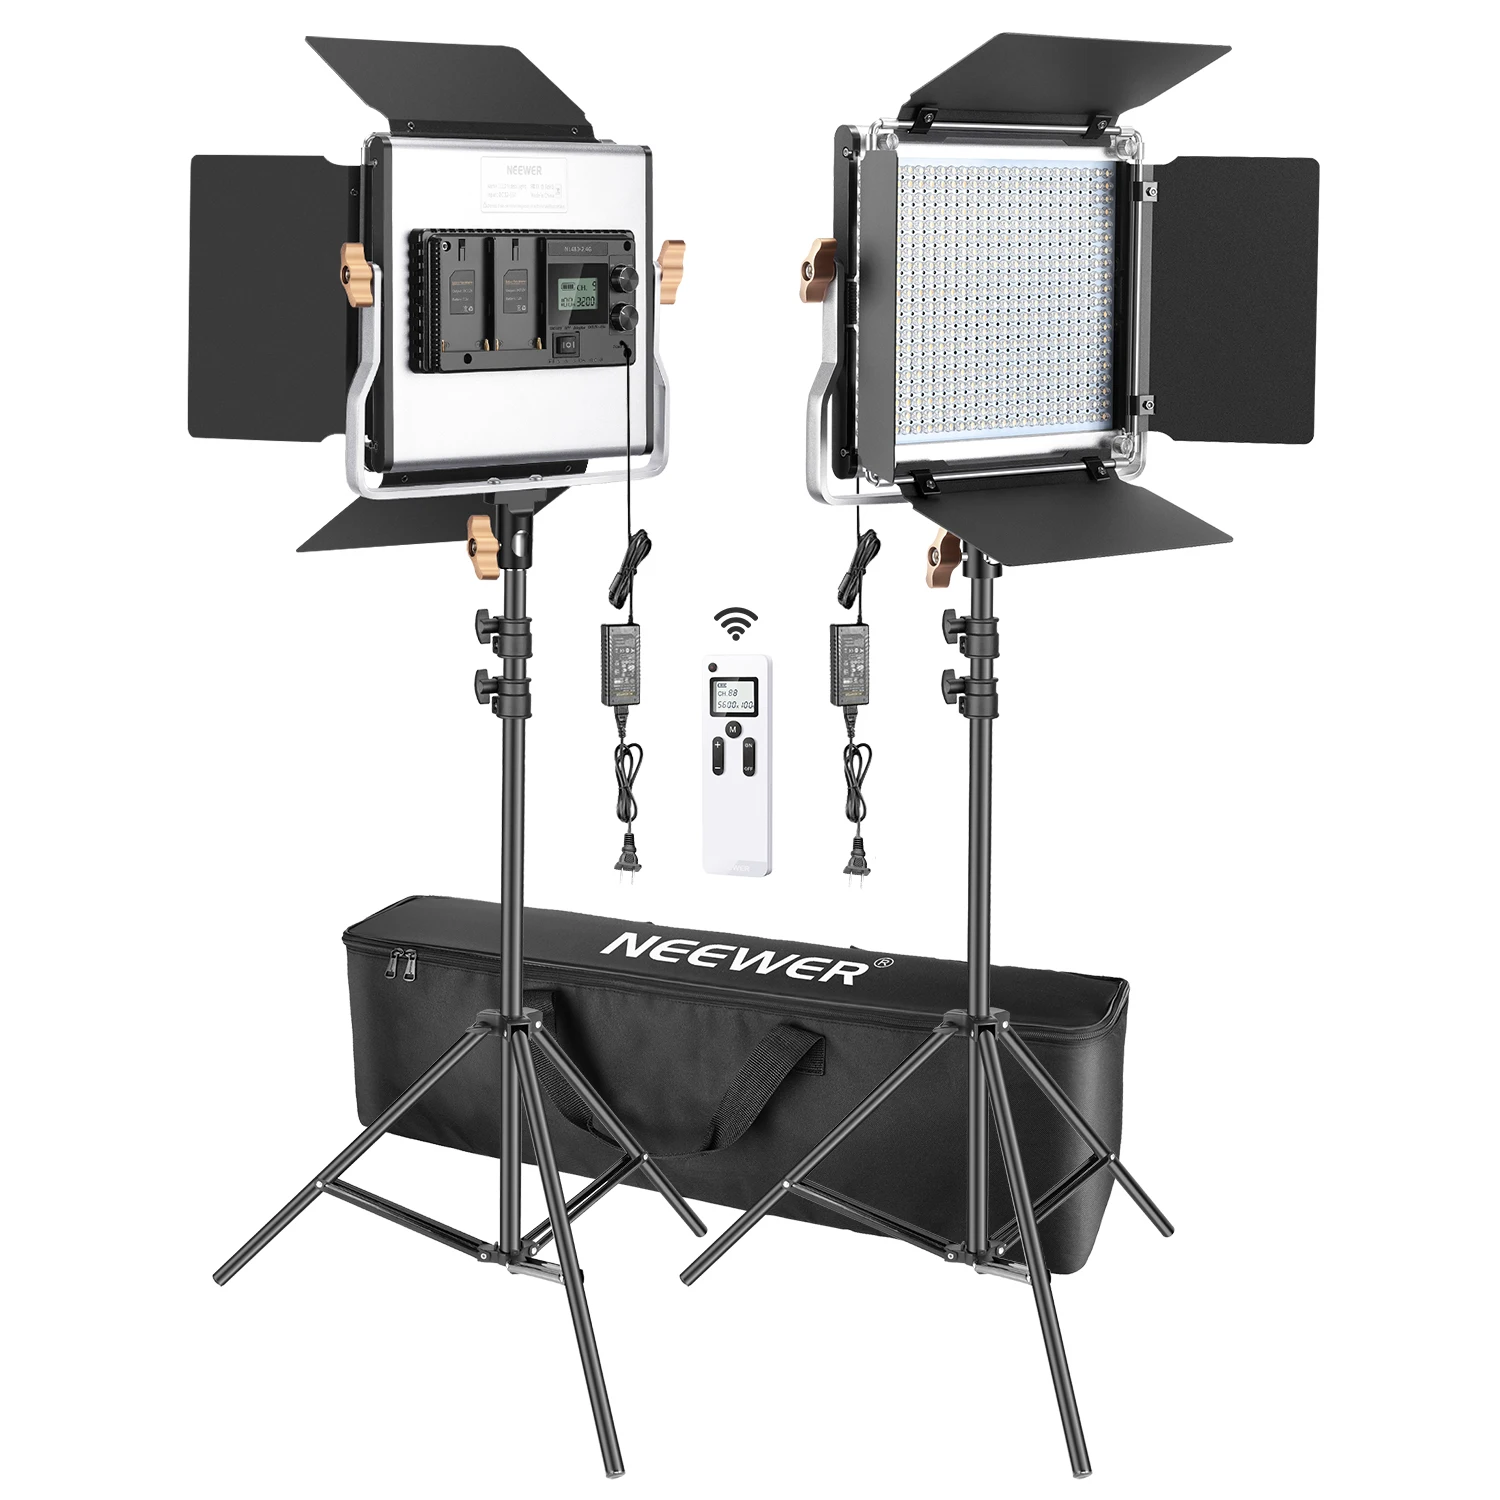 Neewer Packs Advanced 2.4g 480 Led Video Light Photography Lighting Kit  With Bag, Dimmable Bi-color Led Panel With Lcd Screen Photo Studio Kits  AliExpress